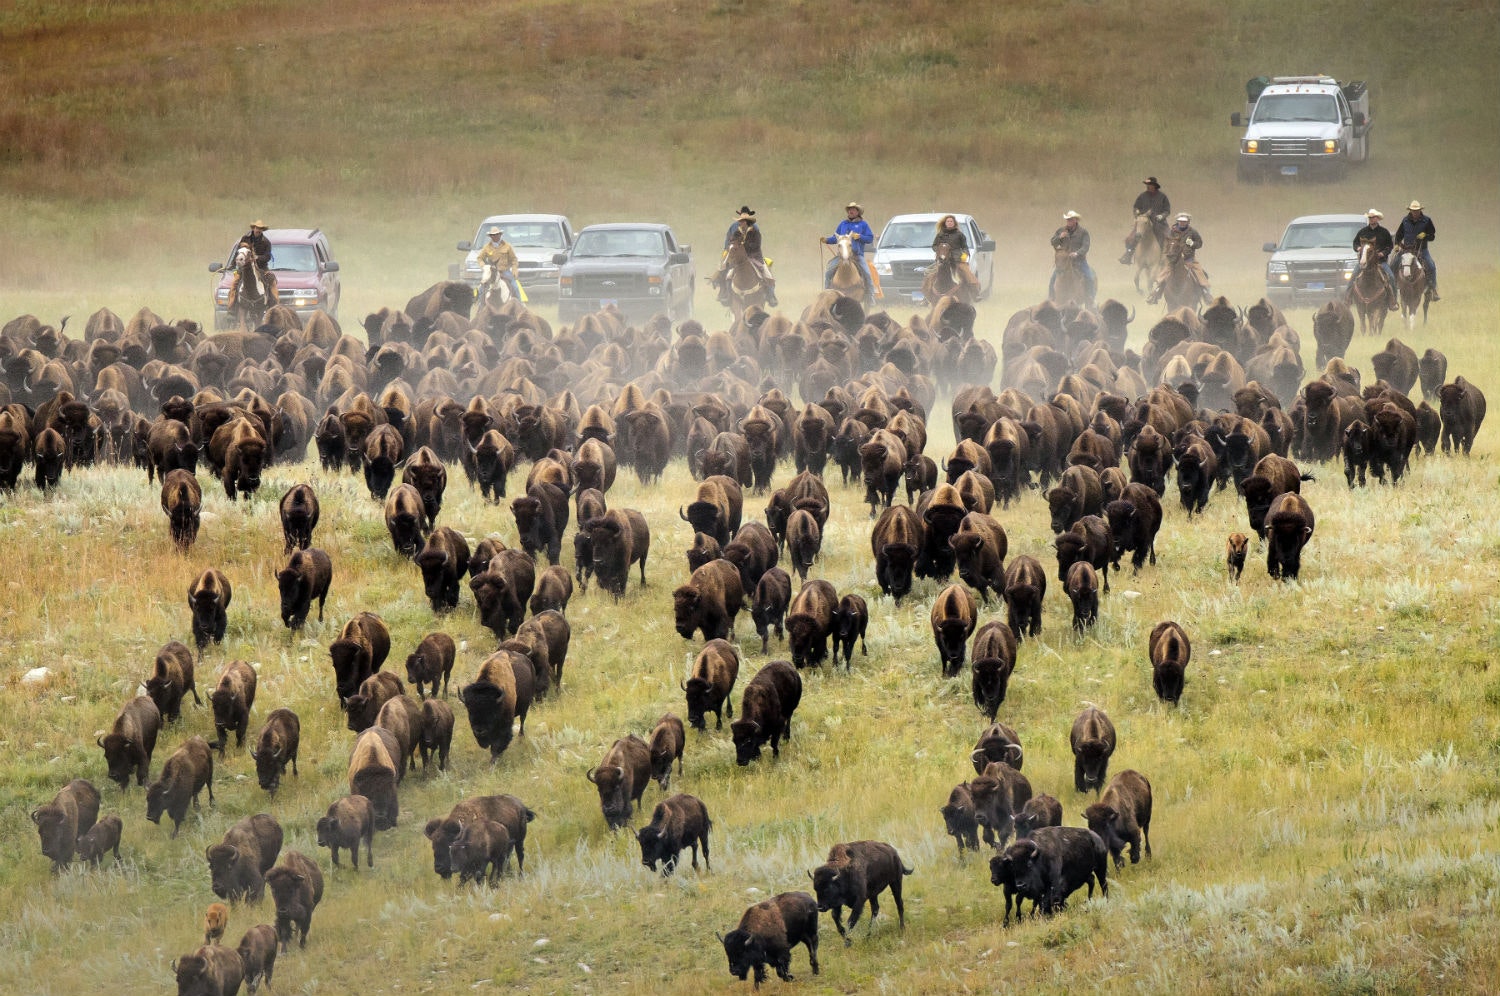 Custer State Park’s annual Buffalo Roundup. Image courtesy of the South Dakota Department of Tourism.